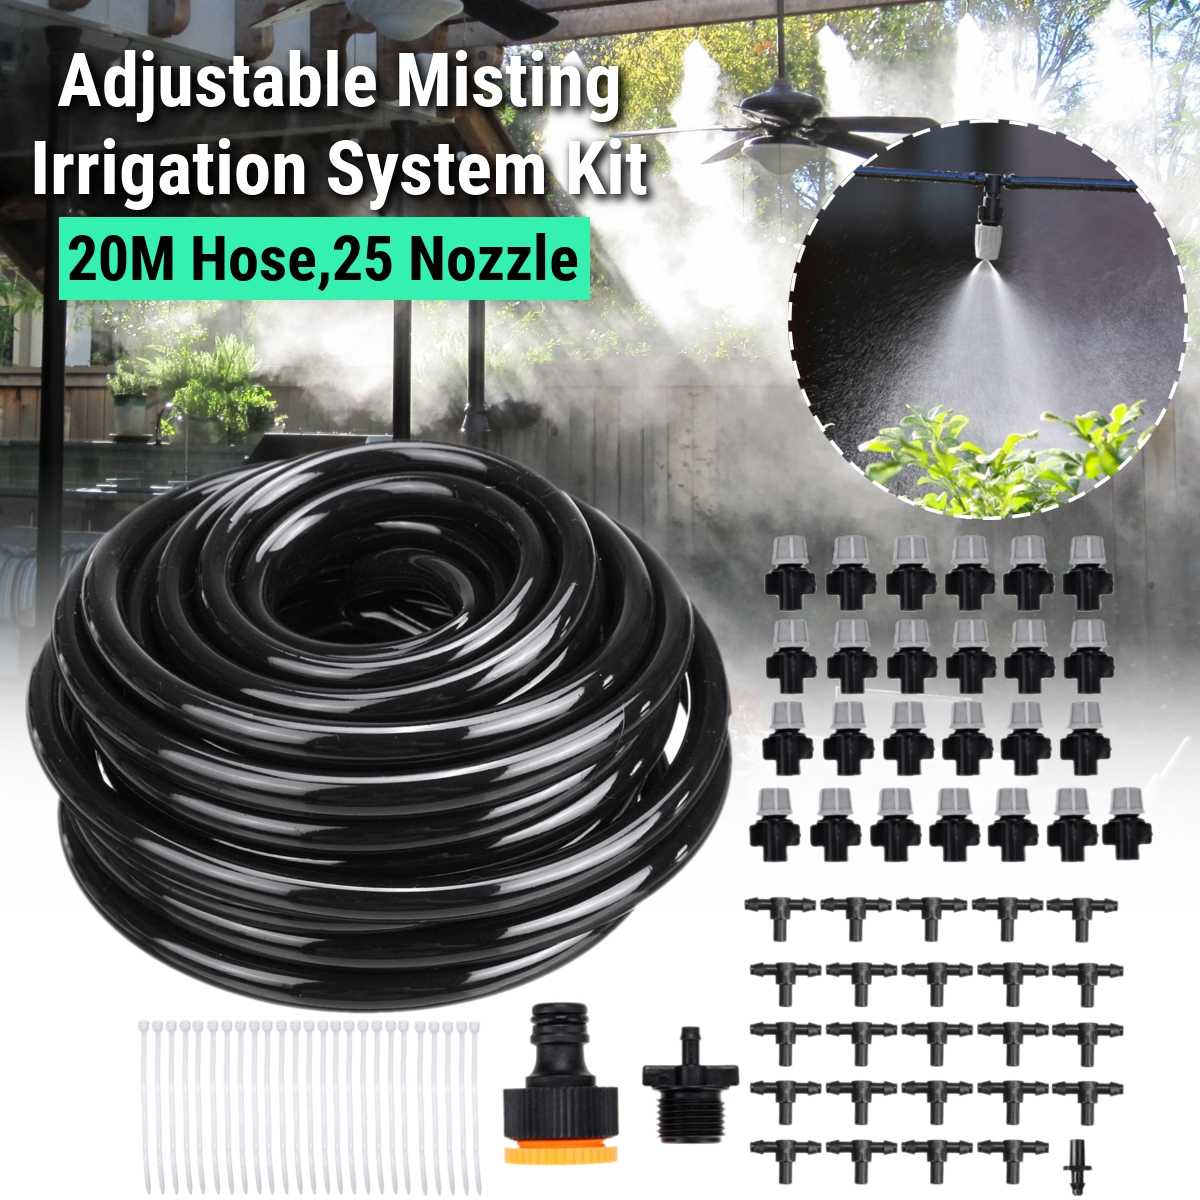 20M Automatic Garden Watering System Kits Self Garden Irrigation Watering Kits Micro Drip Mist Spray Cooling System w/25 Nozzle